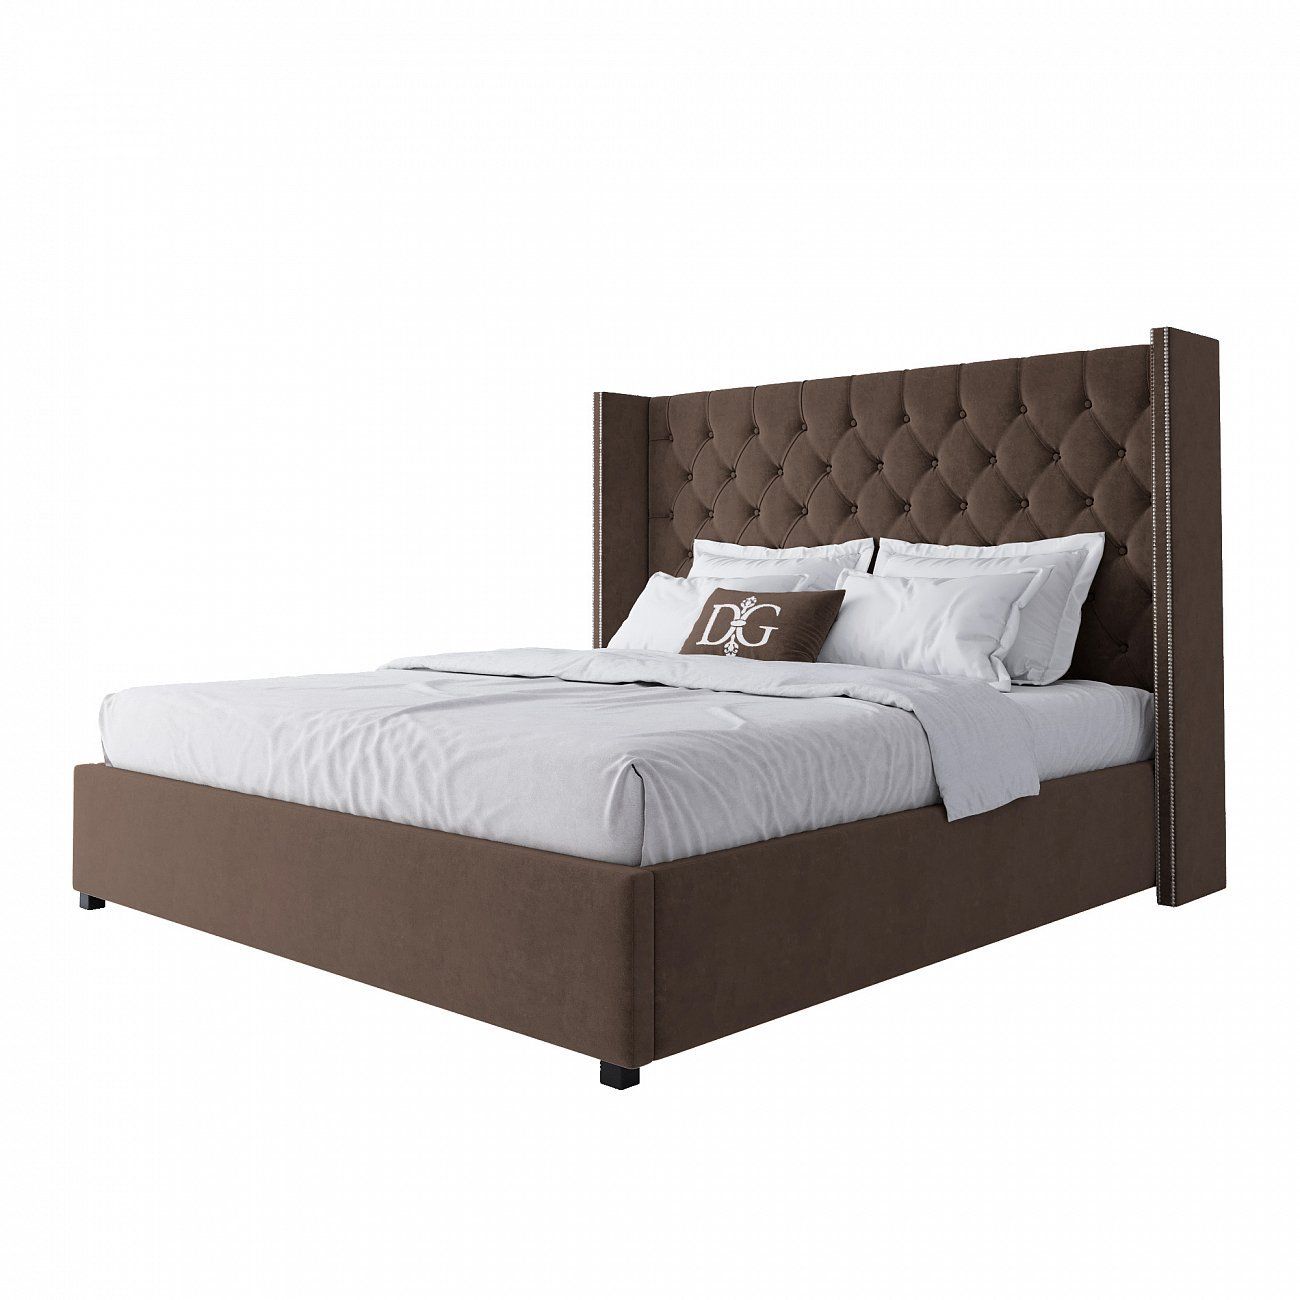 Double bed with upholstered headboard 180x200 cm brown Wing